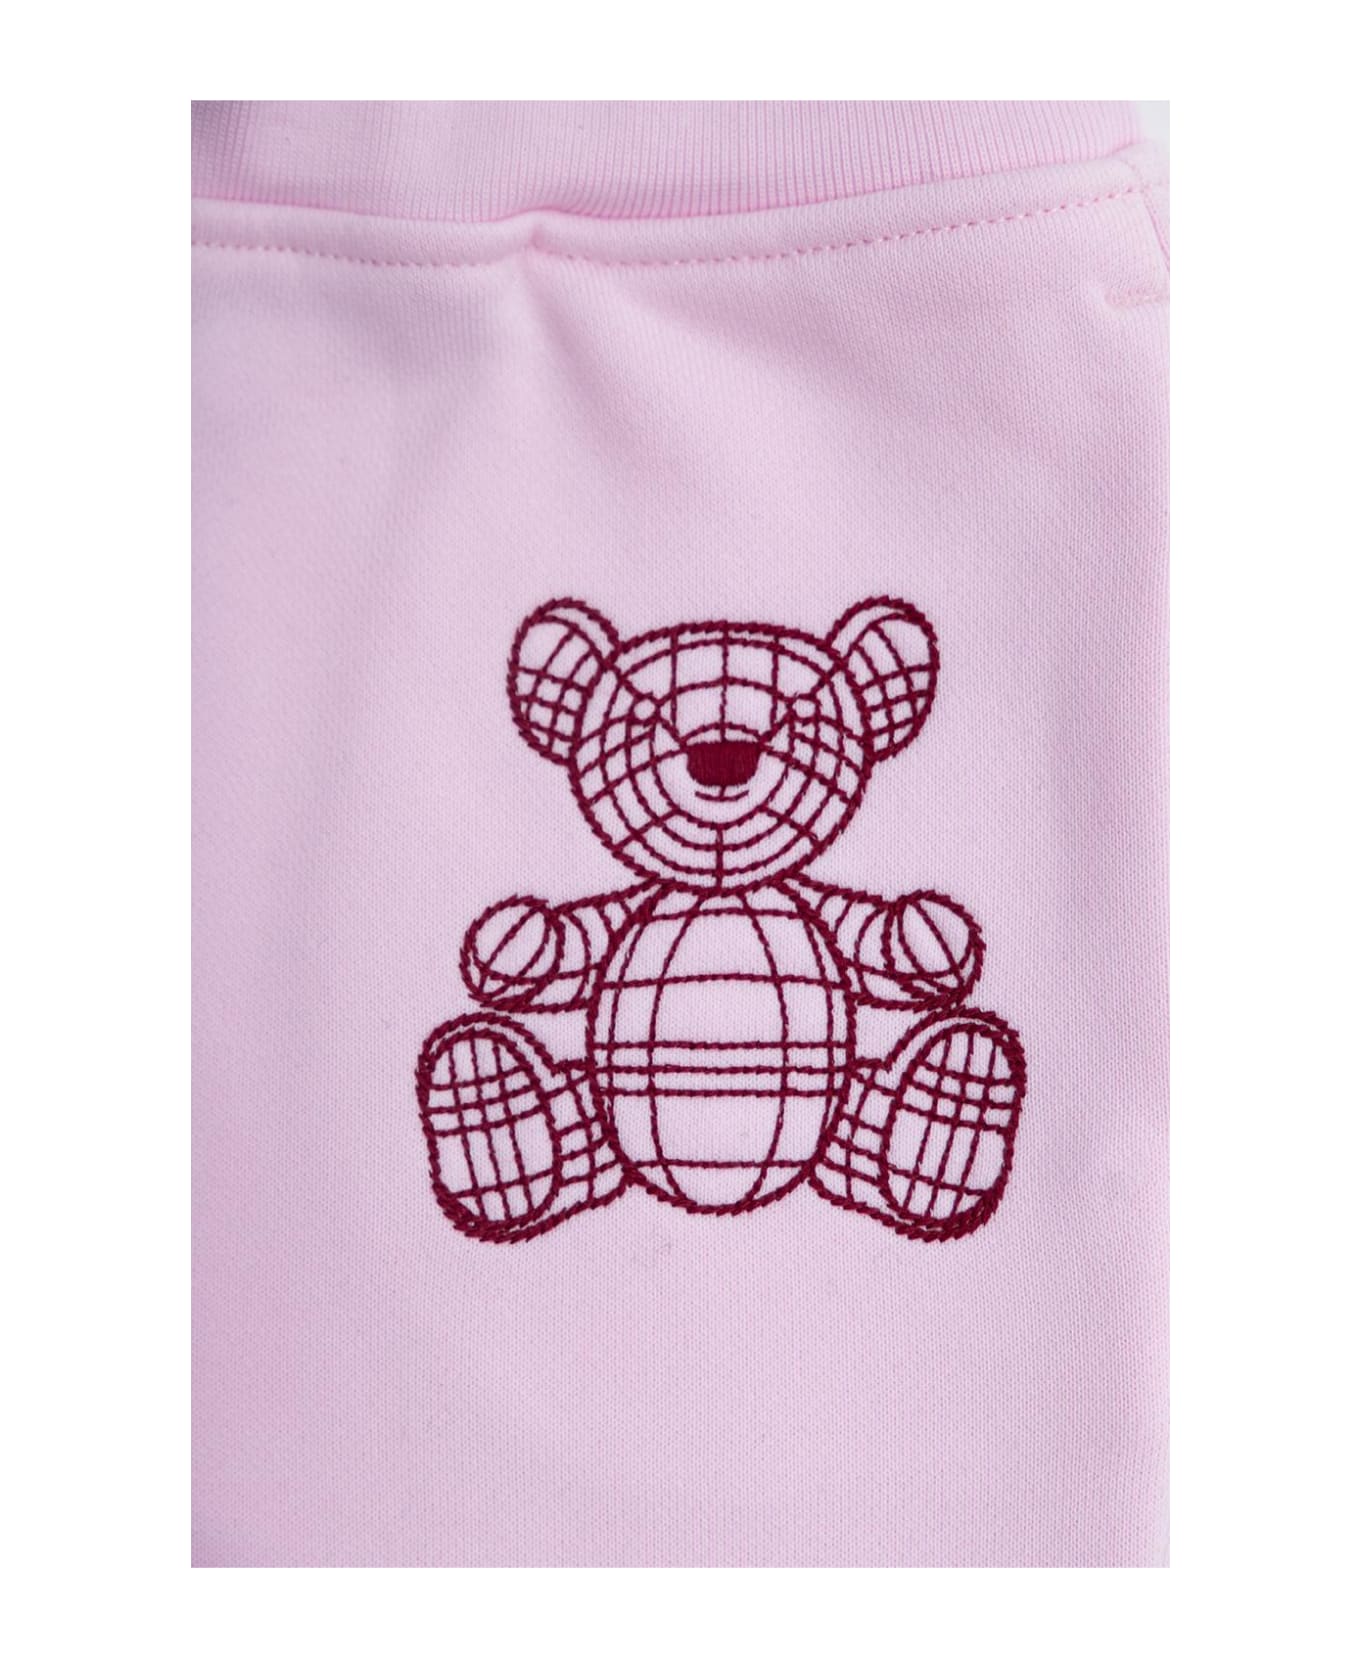 Burberry Sweatpants With Teddy Bear Motif - PINK